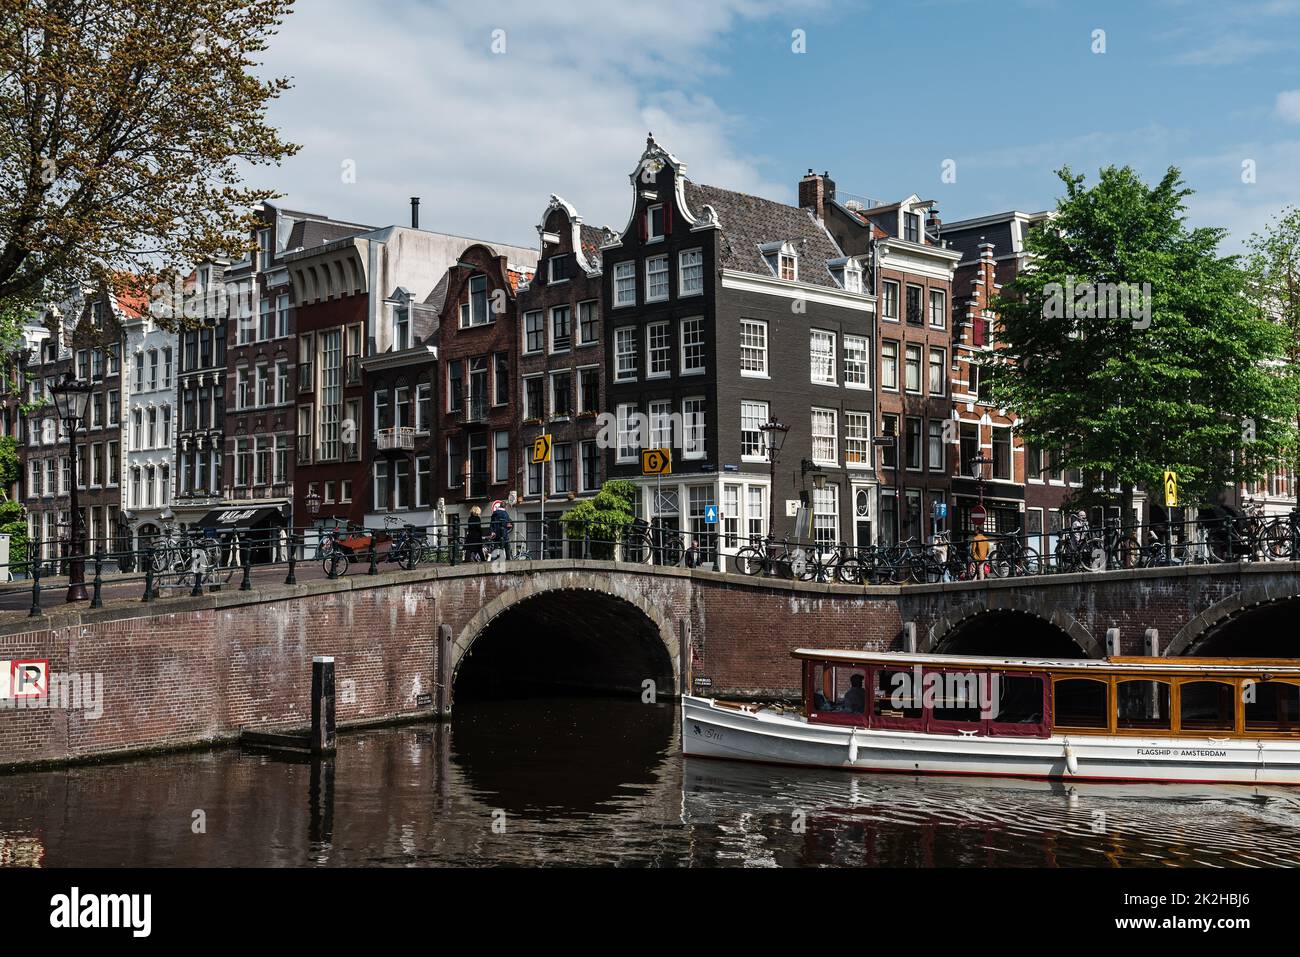 Amsterdam, Netherlands - May 7, 2022: Scenic view of canal with typical Dutch houses in early morning Stock Photo